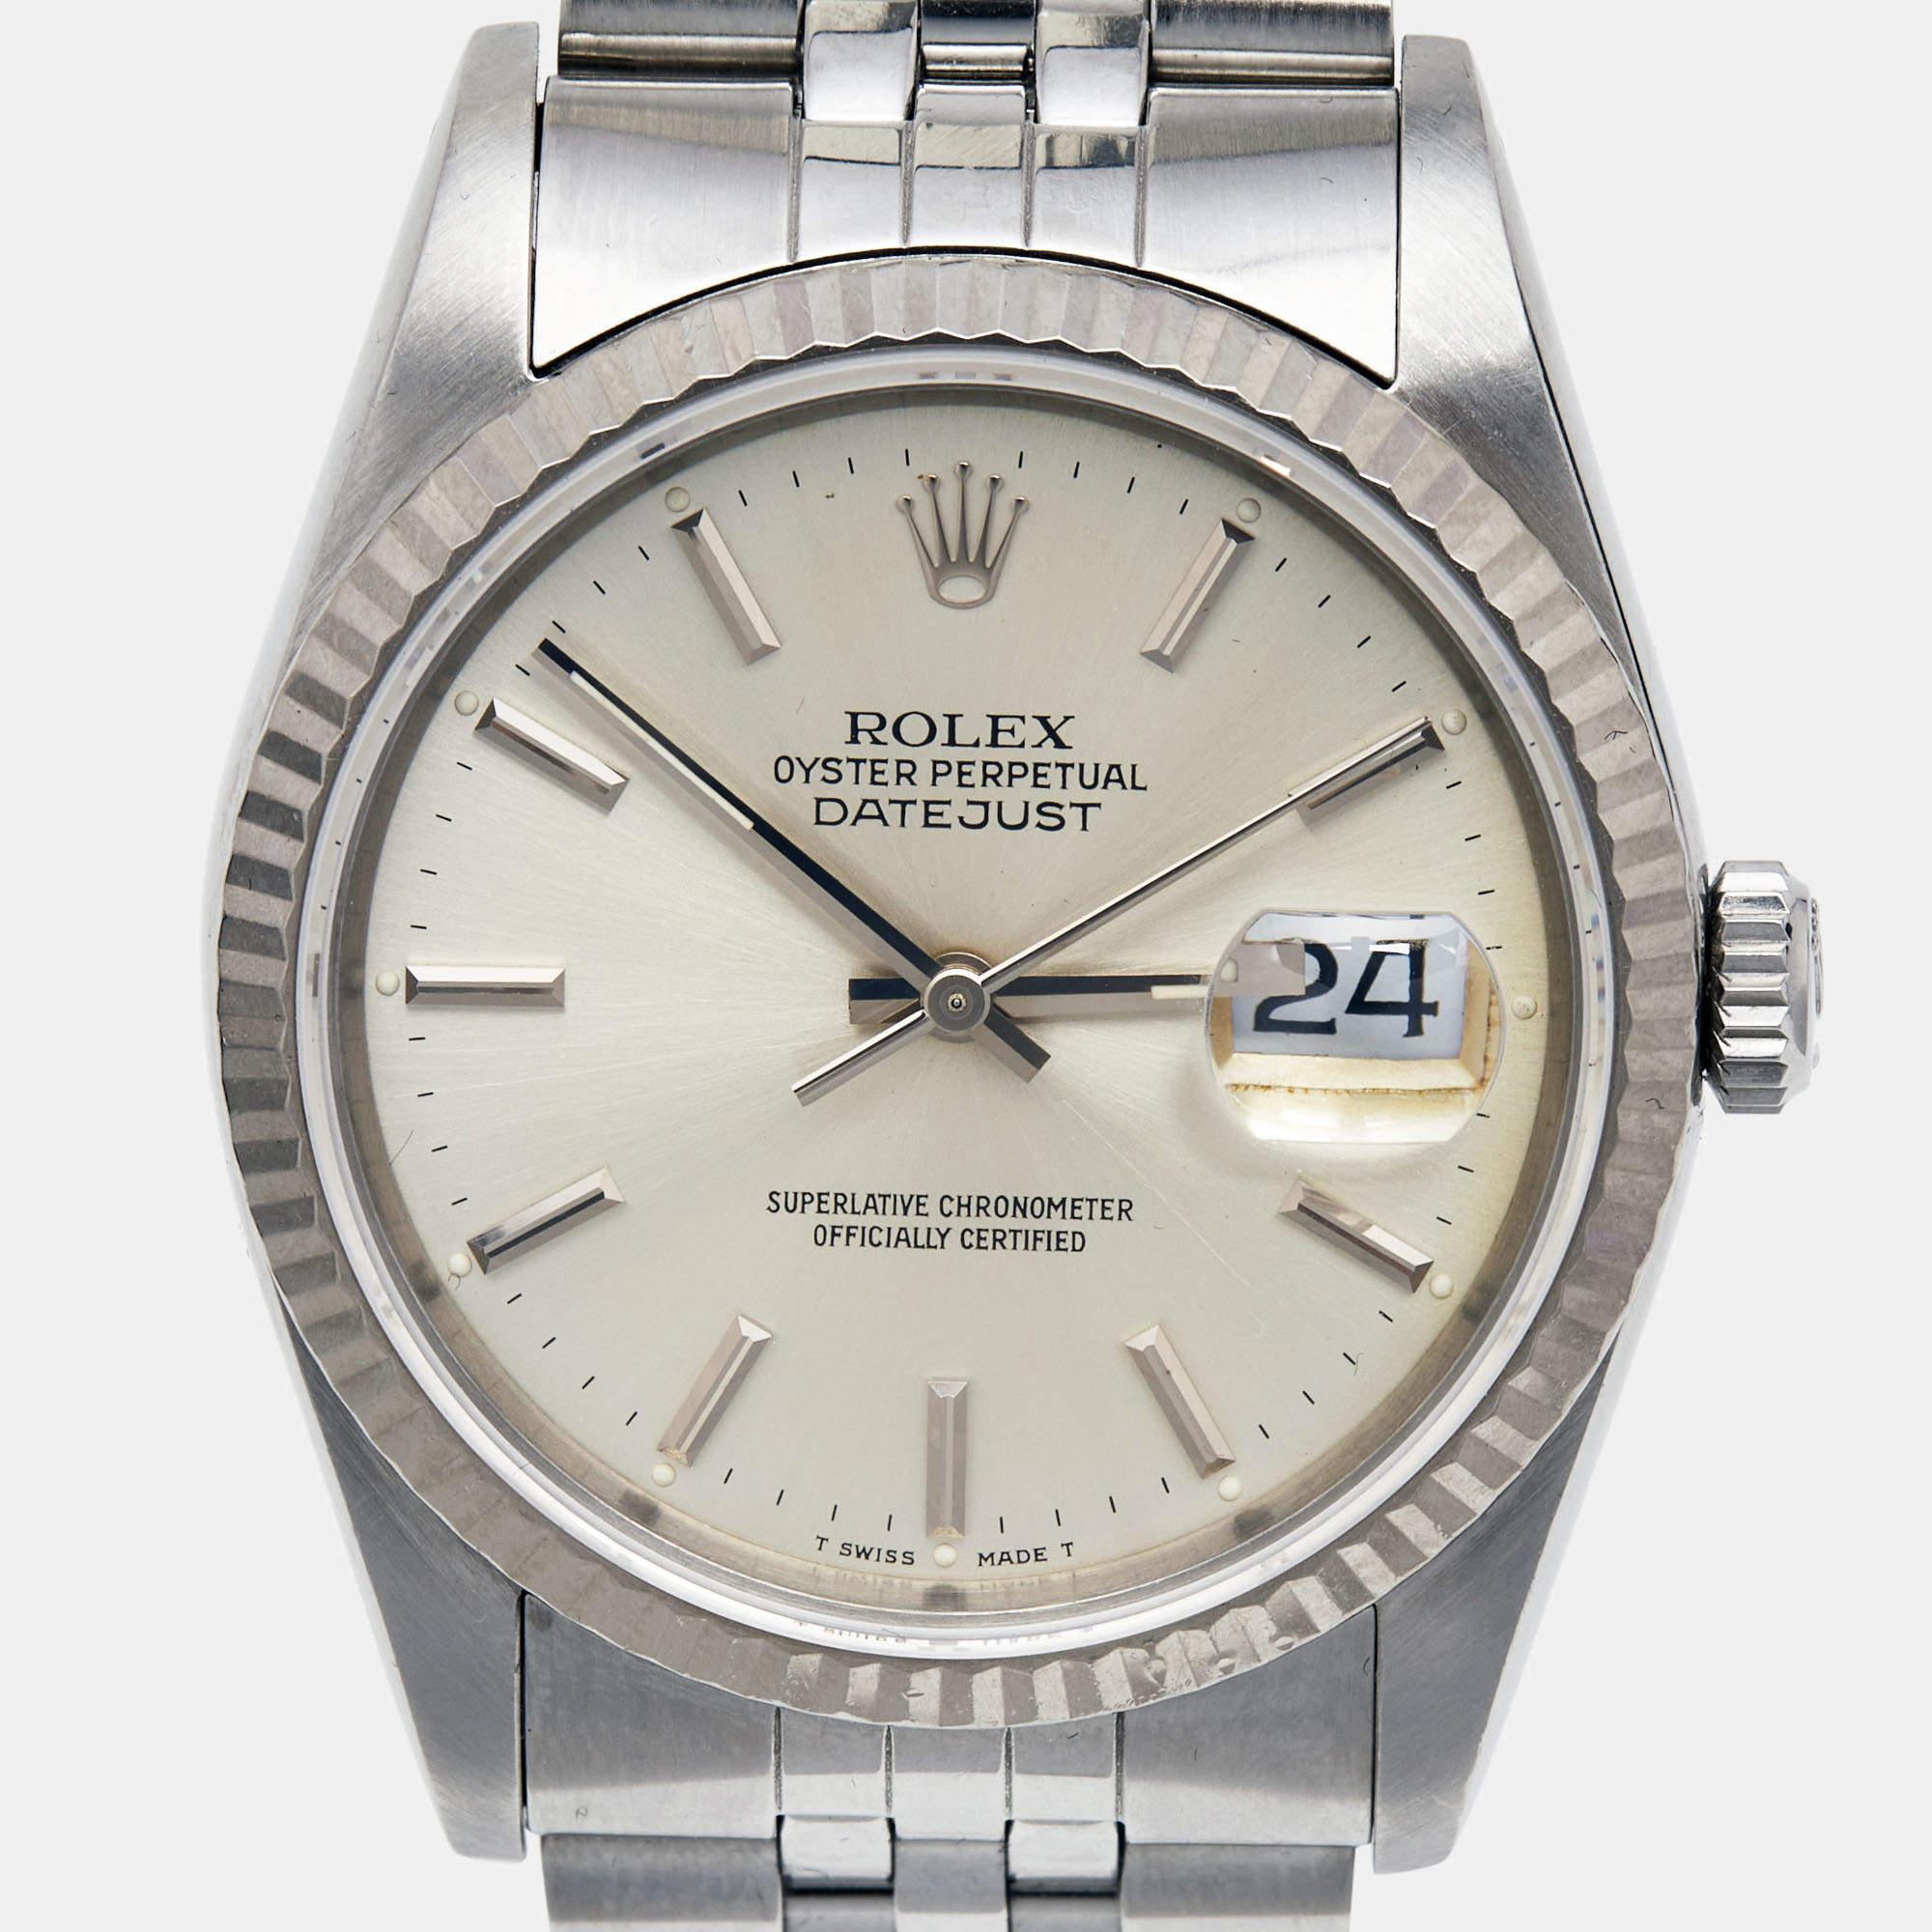 Rolex Silver 18k White Gold Stainless Steel Datejust 16234 Men's Wristwatch 36 m For Sale 2